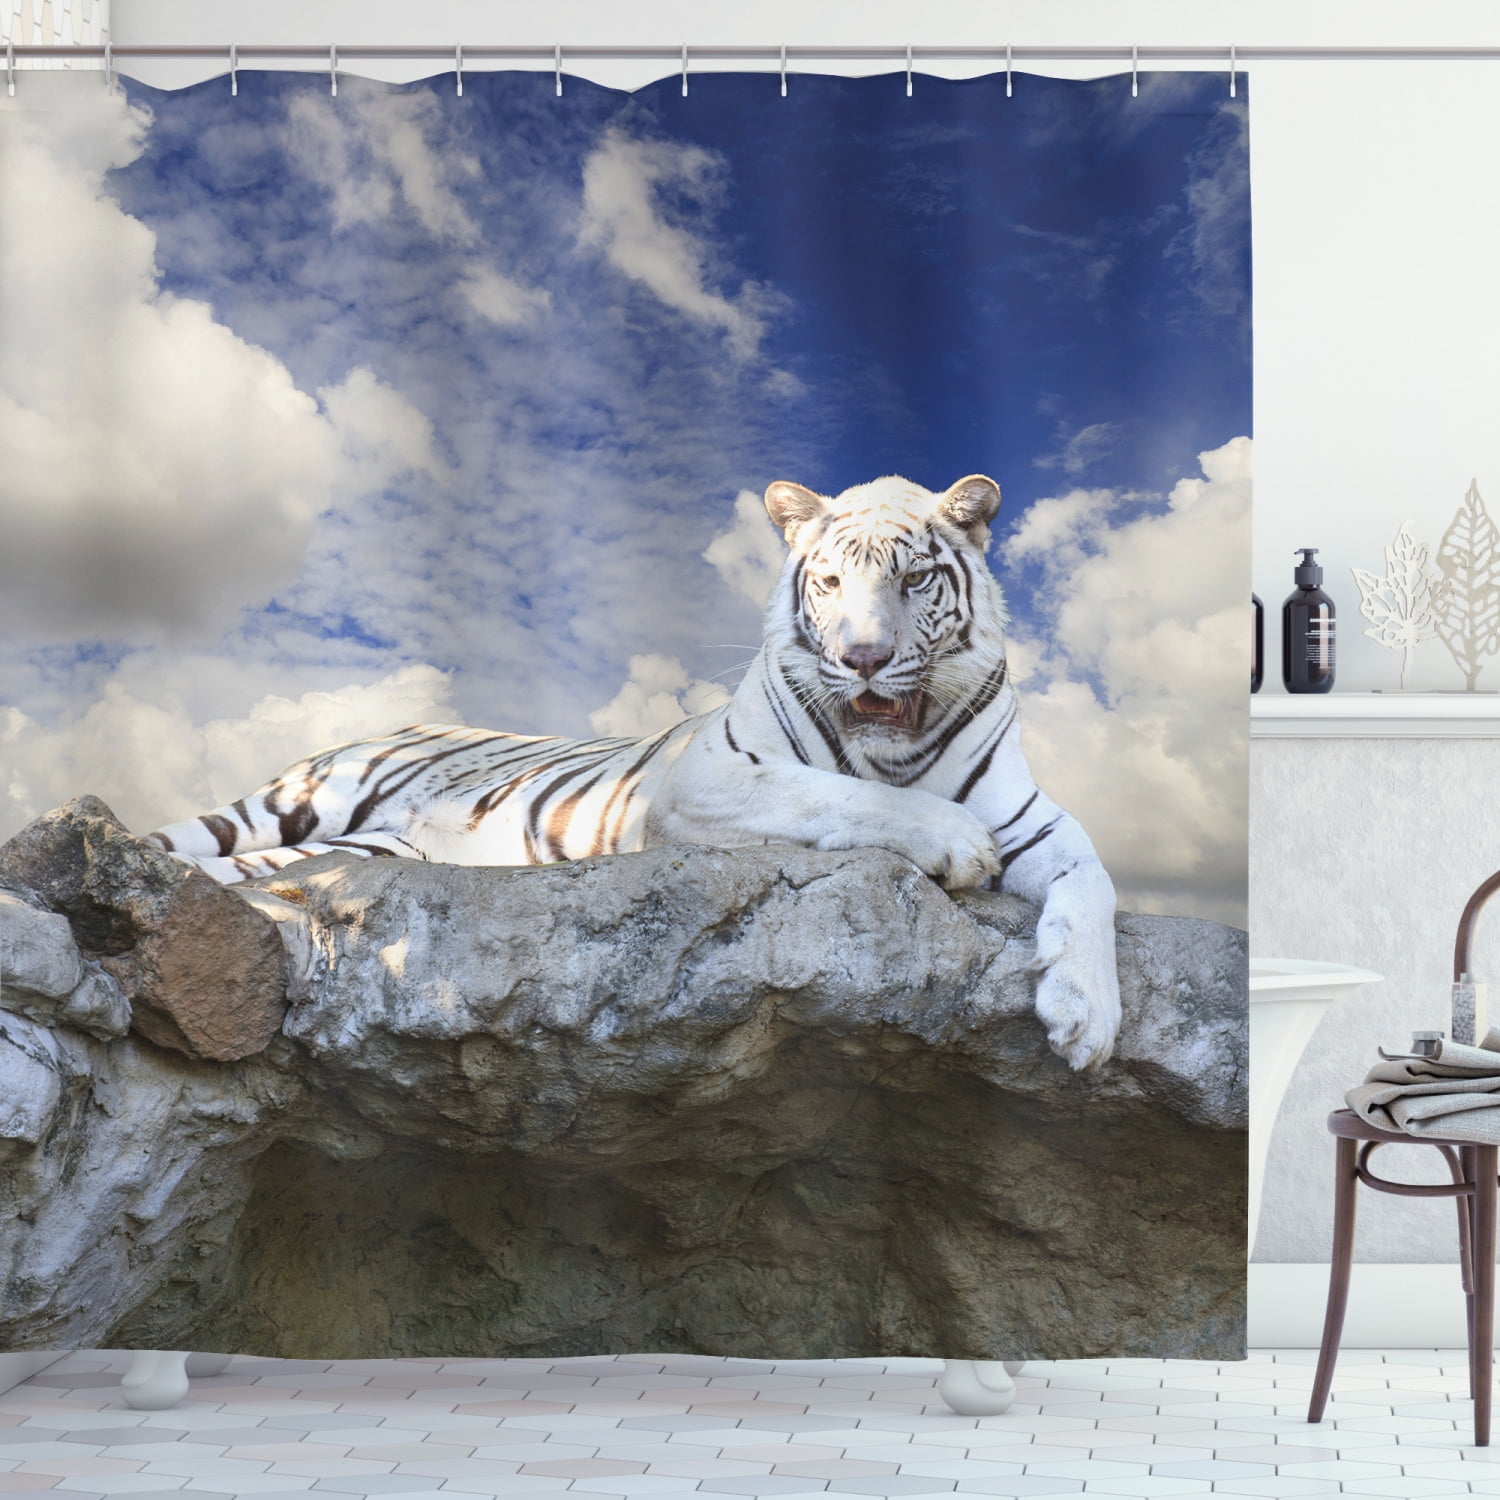 Tiger Lying Down in Field Shower Curtain Set Bathroom Waterpoof Fabric 72x72" 